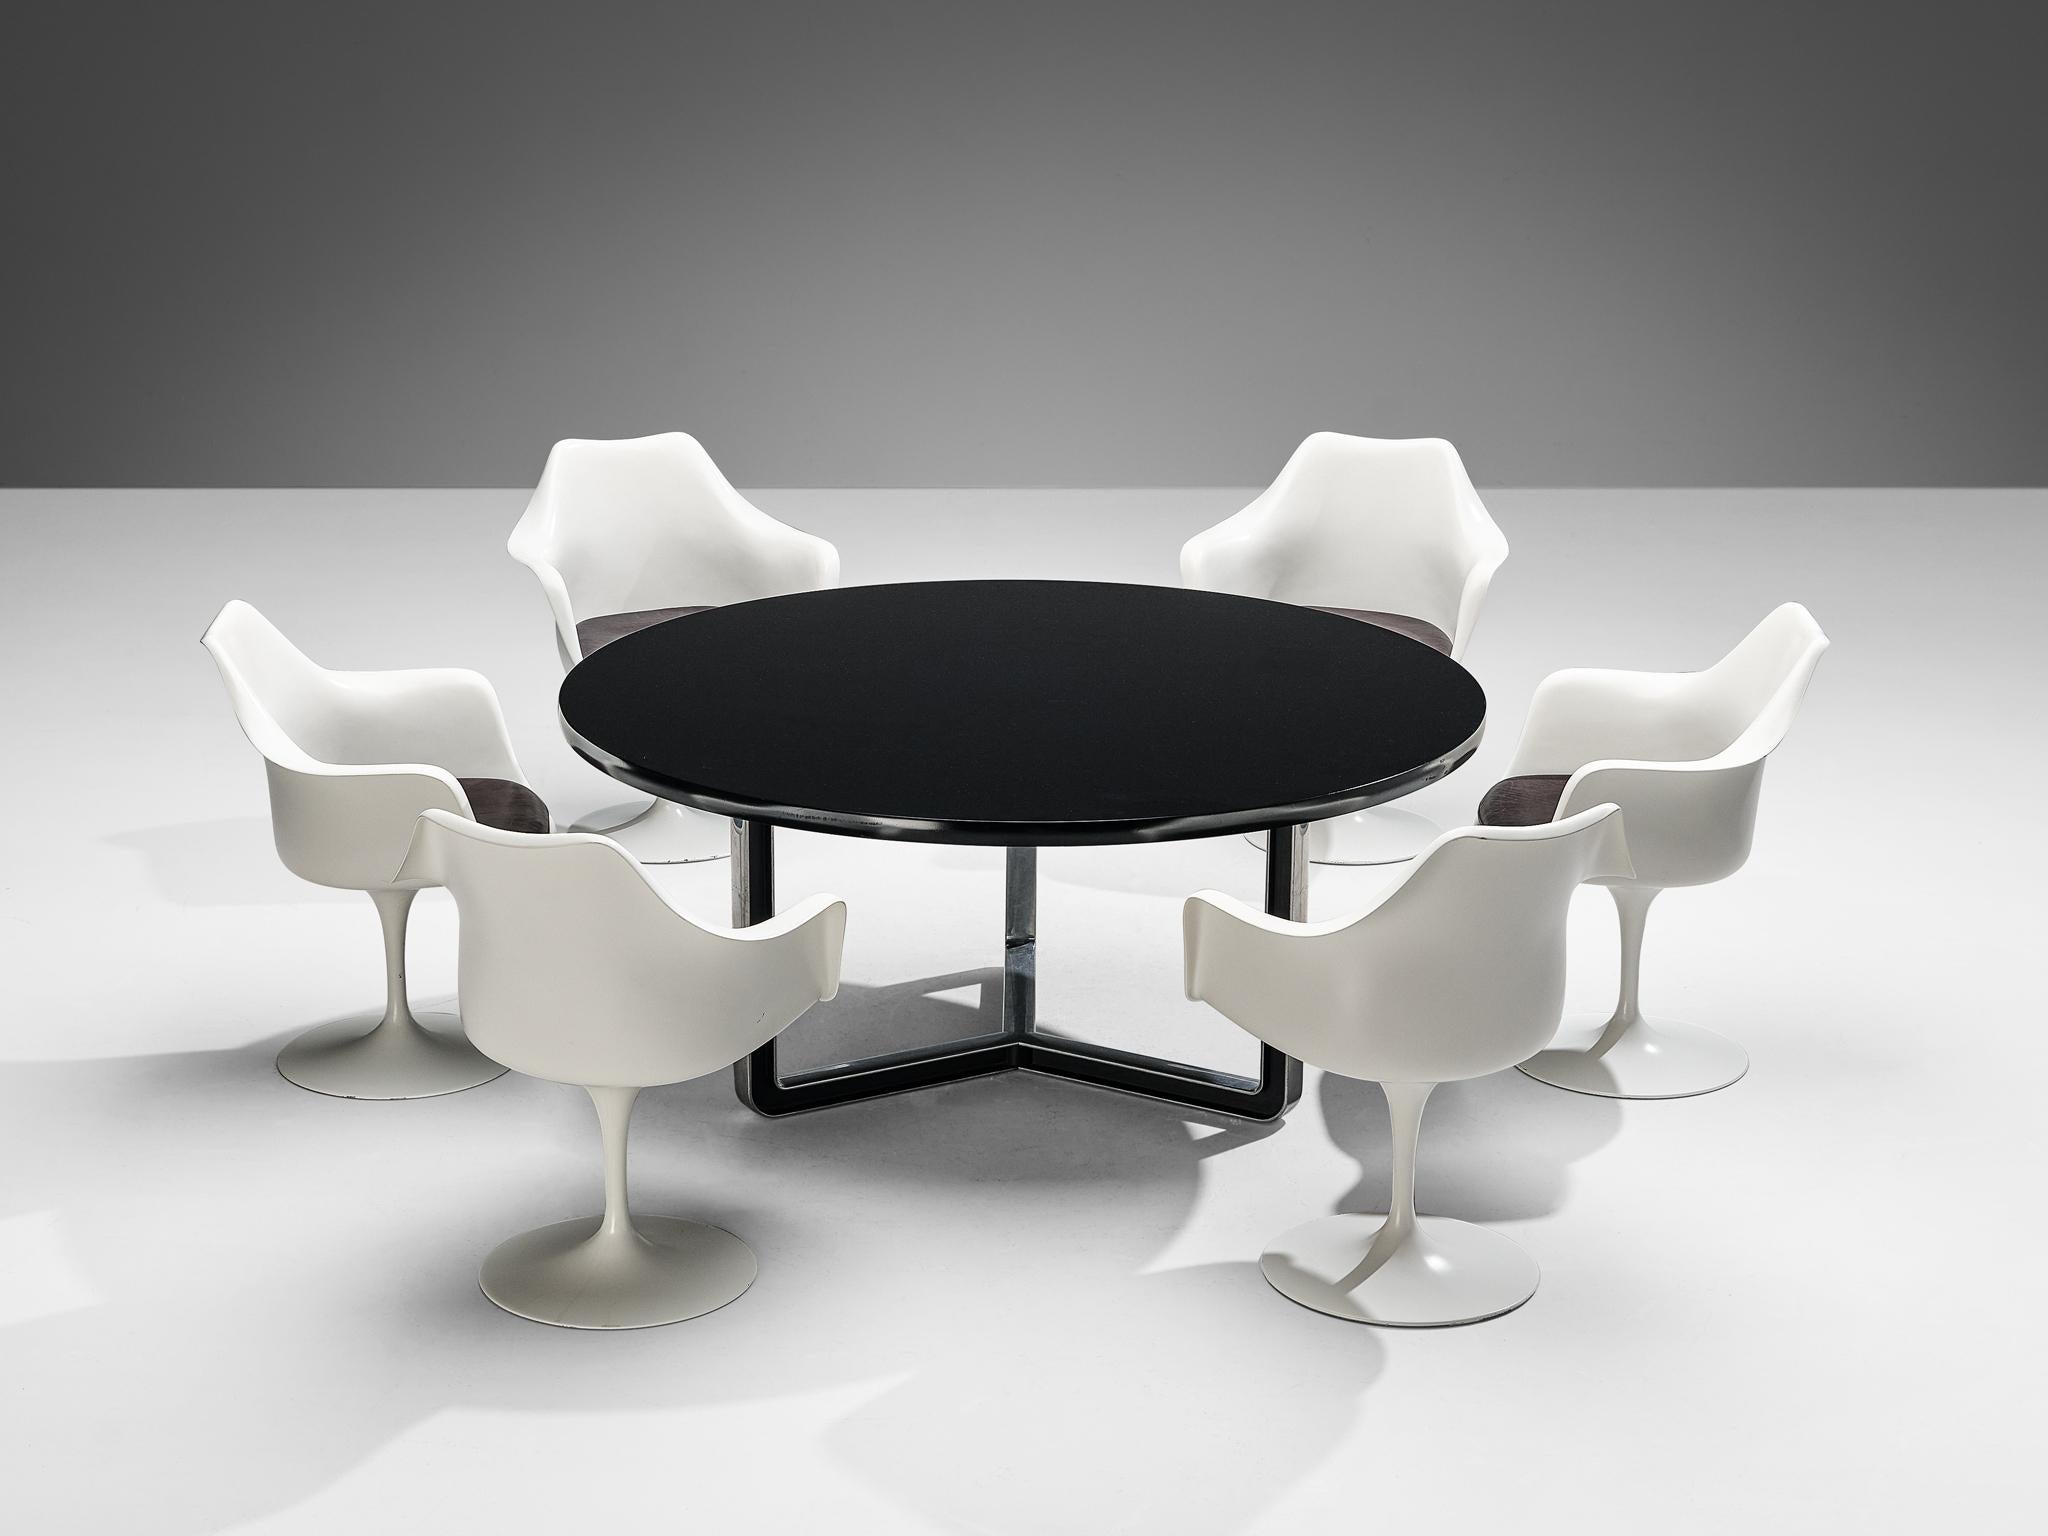 Set of Eero Saarinen for Knoll set of six 'Tulip' armchairs with Centro Progetti Tecno round dining table


Eero Saarinen for Knoll, set of six 'Tulip' armchairs, fiberglass, aluminum and leather, United States, design 1955-56, later